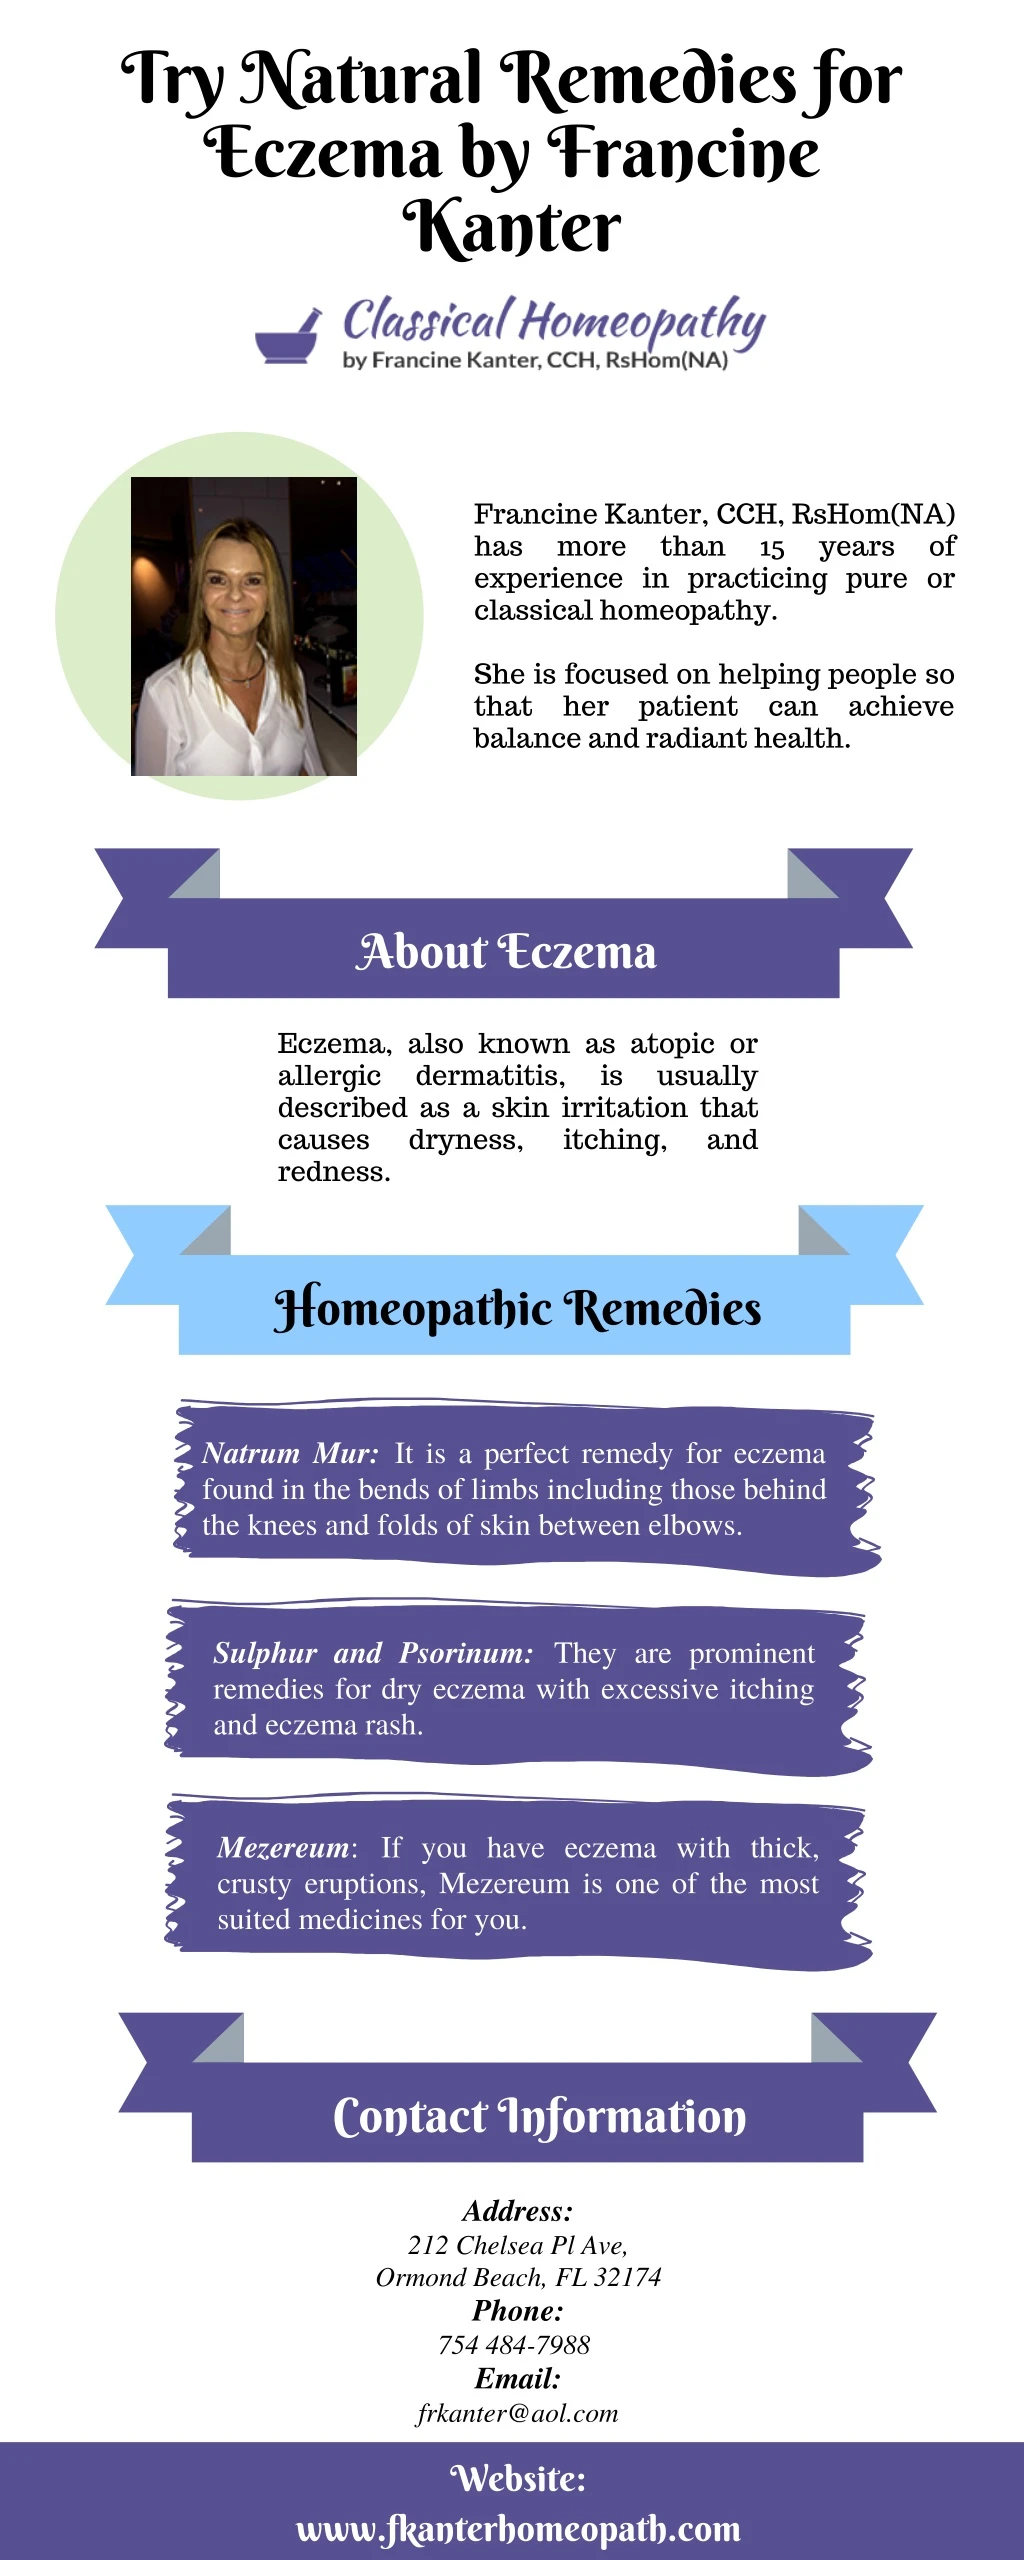 try natural remedies for eczema by francine kanter